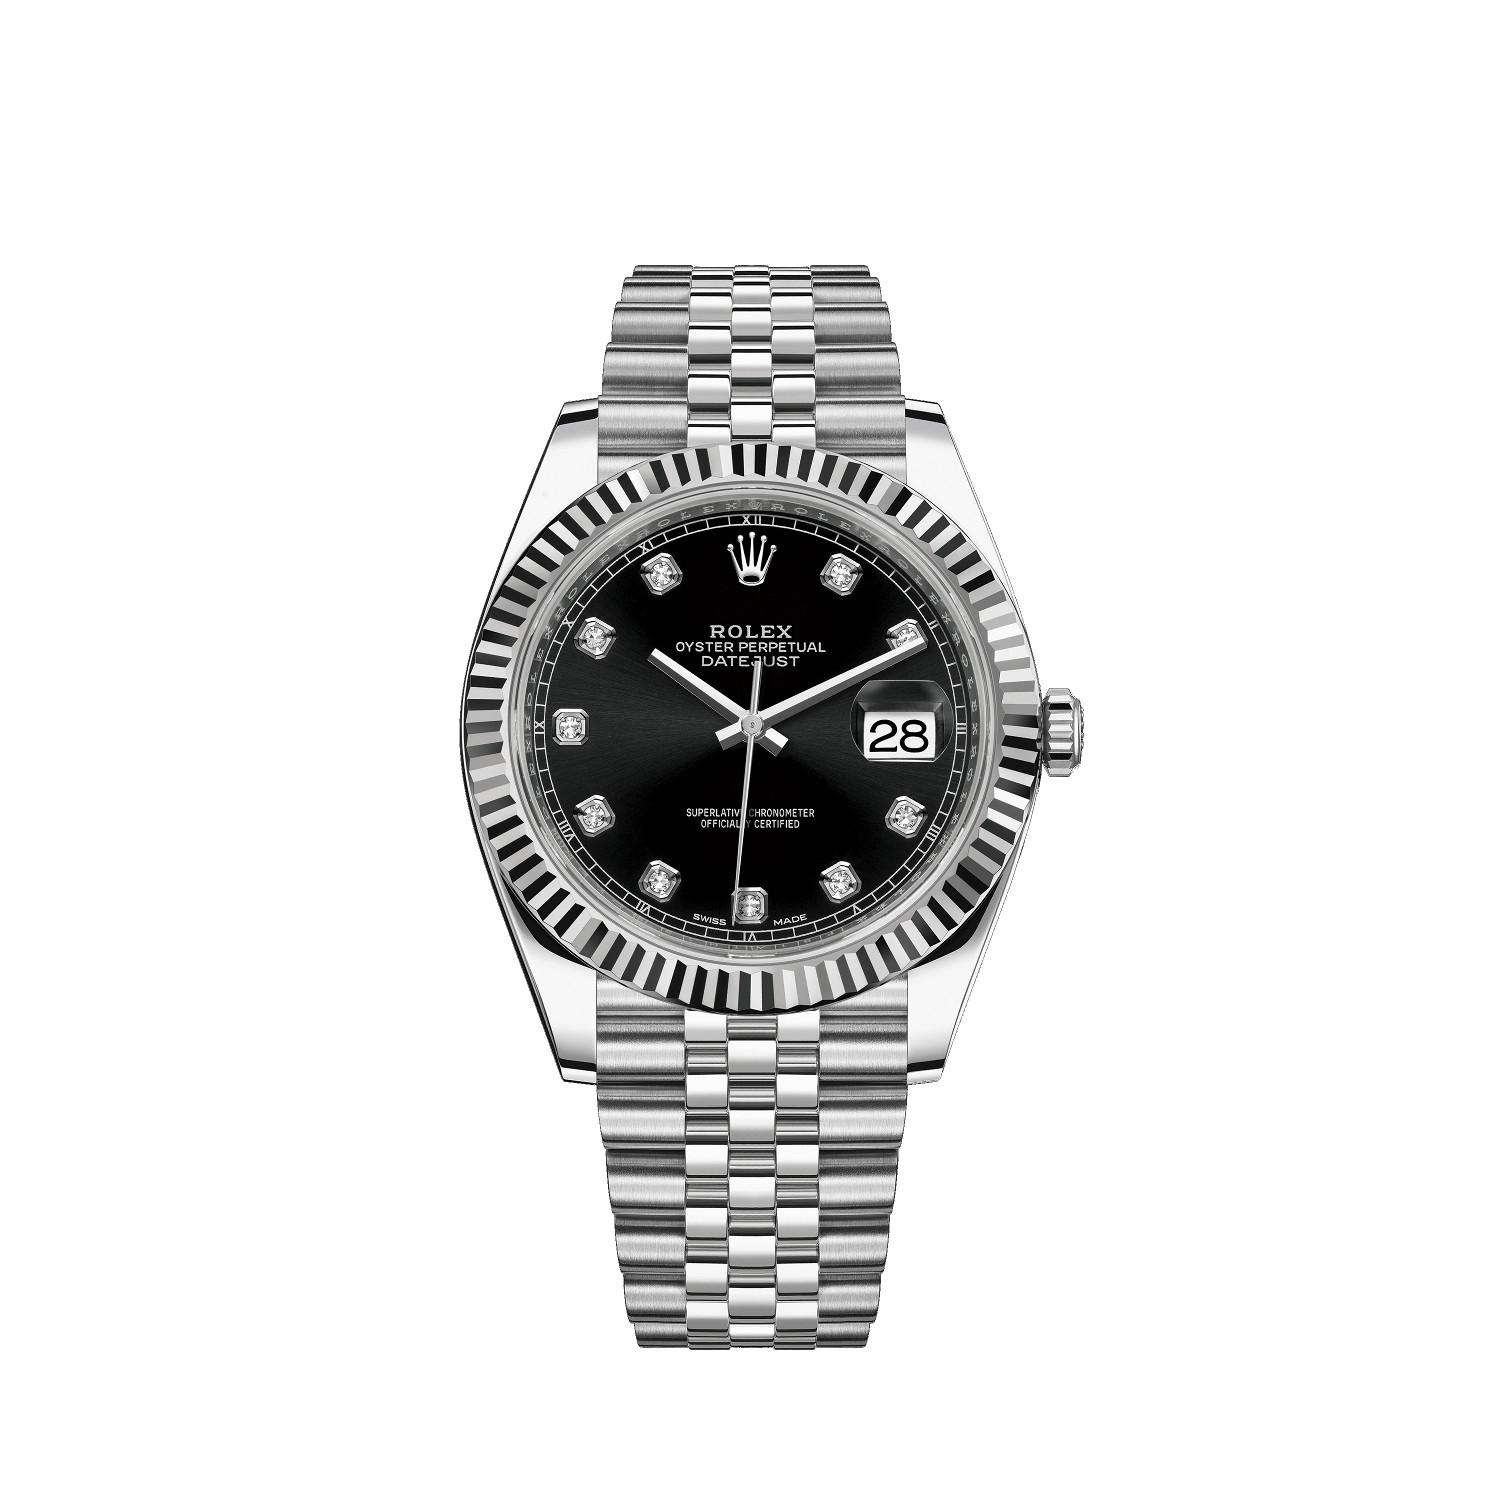 Datejust 41 126334 White Gold & Stainless Steel Watch (Black Set with Diamonds)